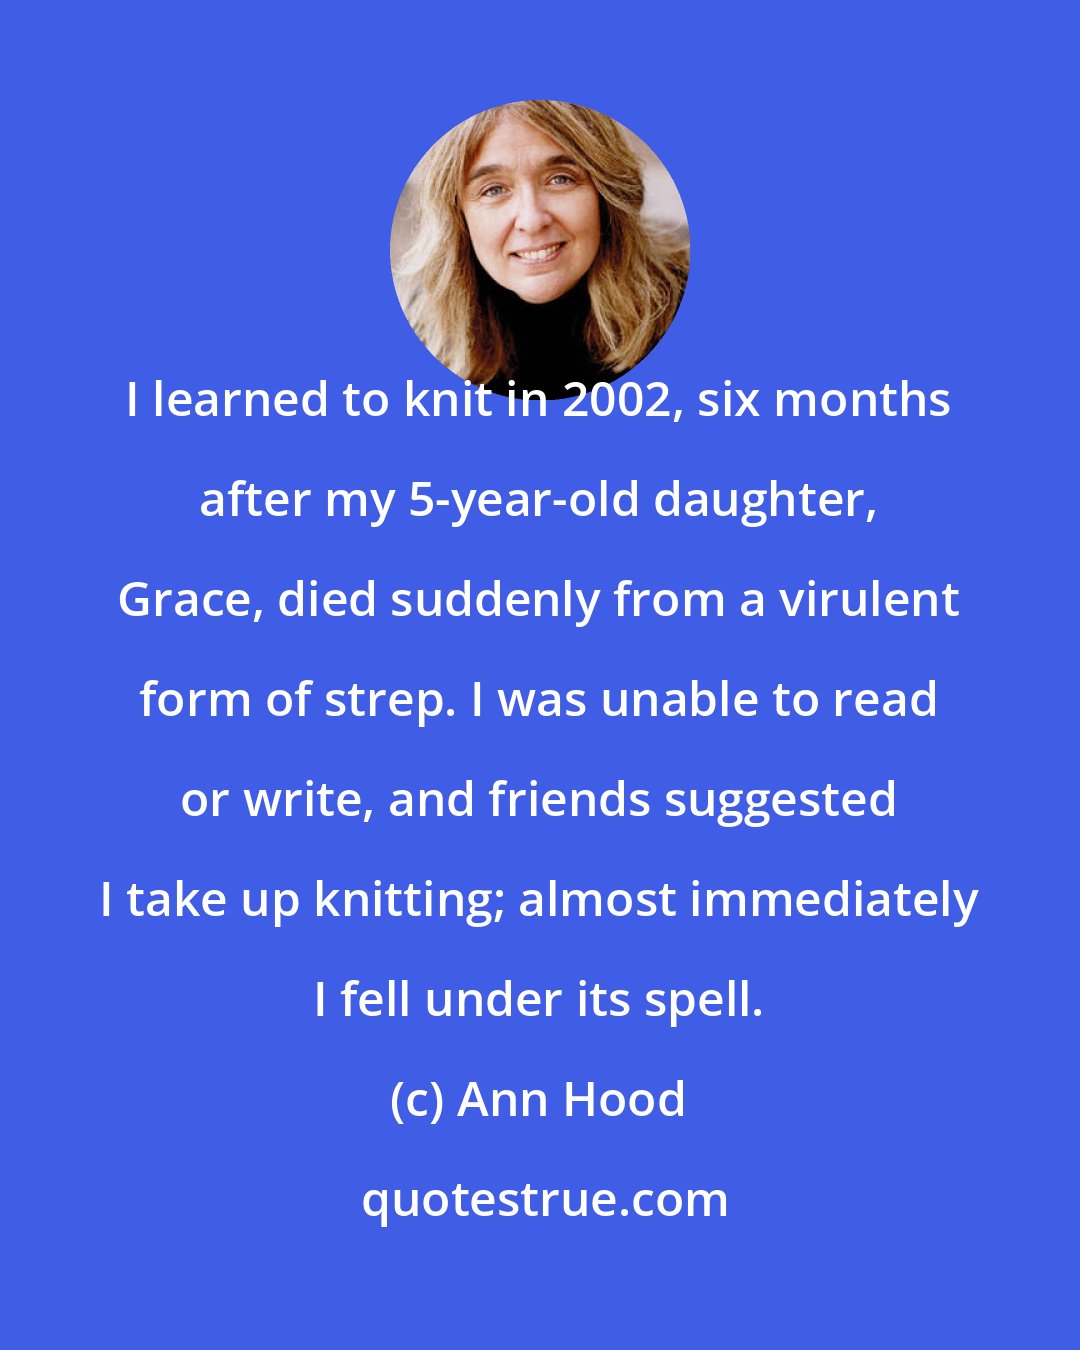 Ann Hood: I learned to knit in 2002, six months after my 5-year-old daughter, Grace, died suddenly from a virulent form of strep. I was unable to read or write, and friends suggested I take up knitting; almost immediately I fell under its spell.